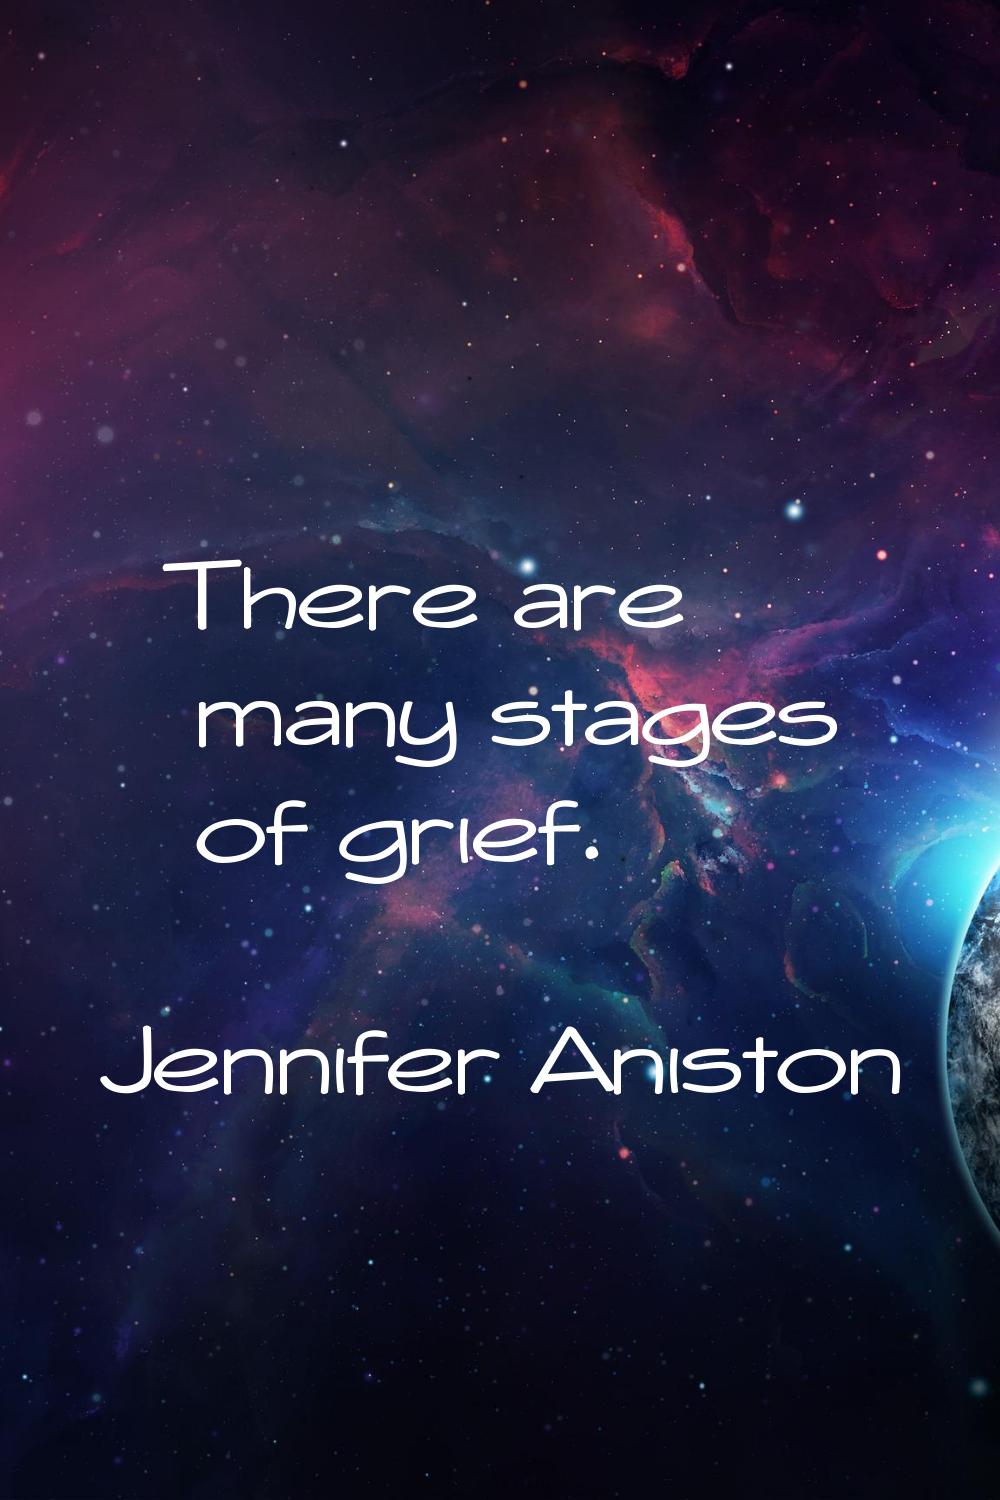 There are many stages of grief.